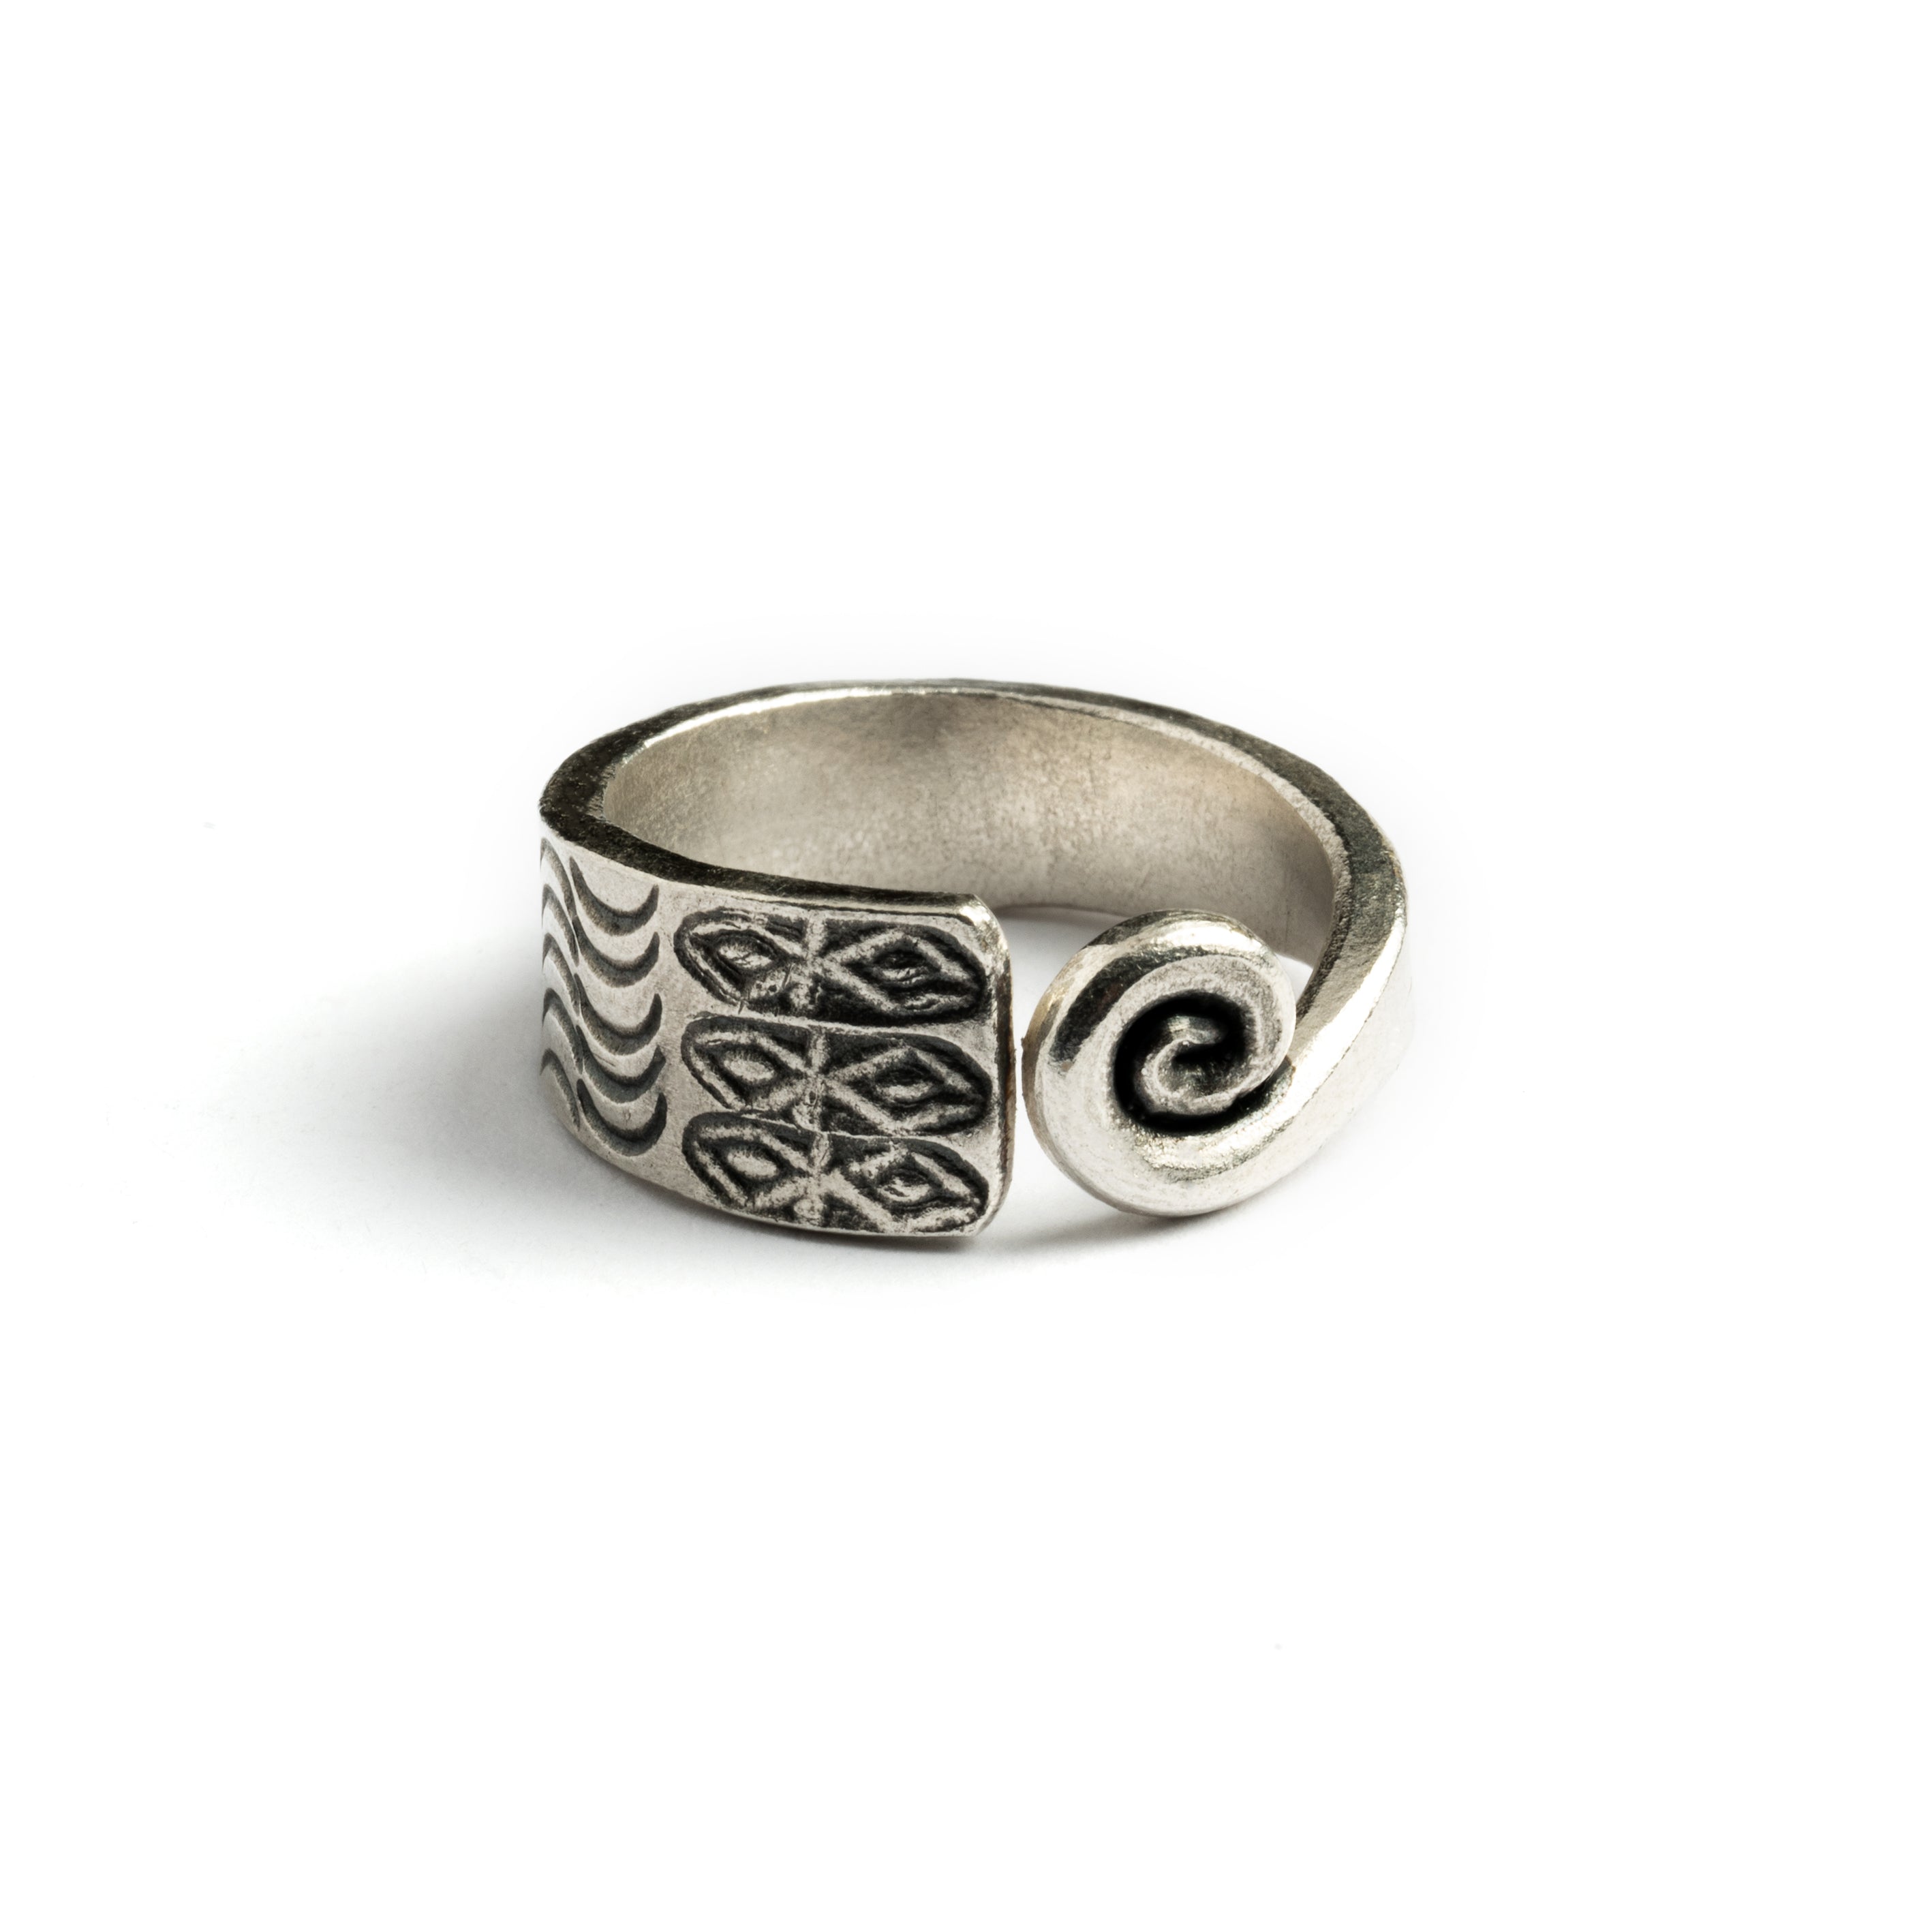 Hill Tribe Silver Ring frontal view